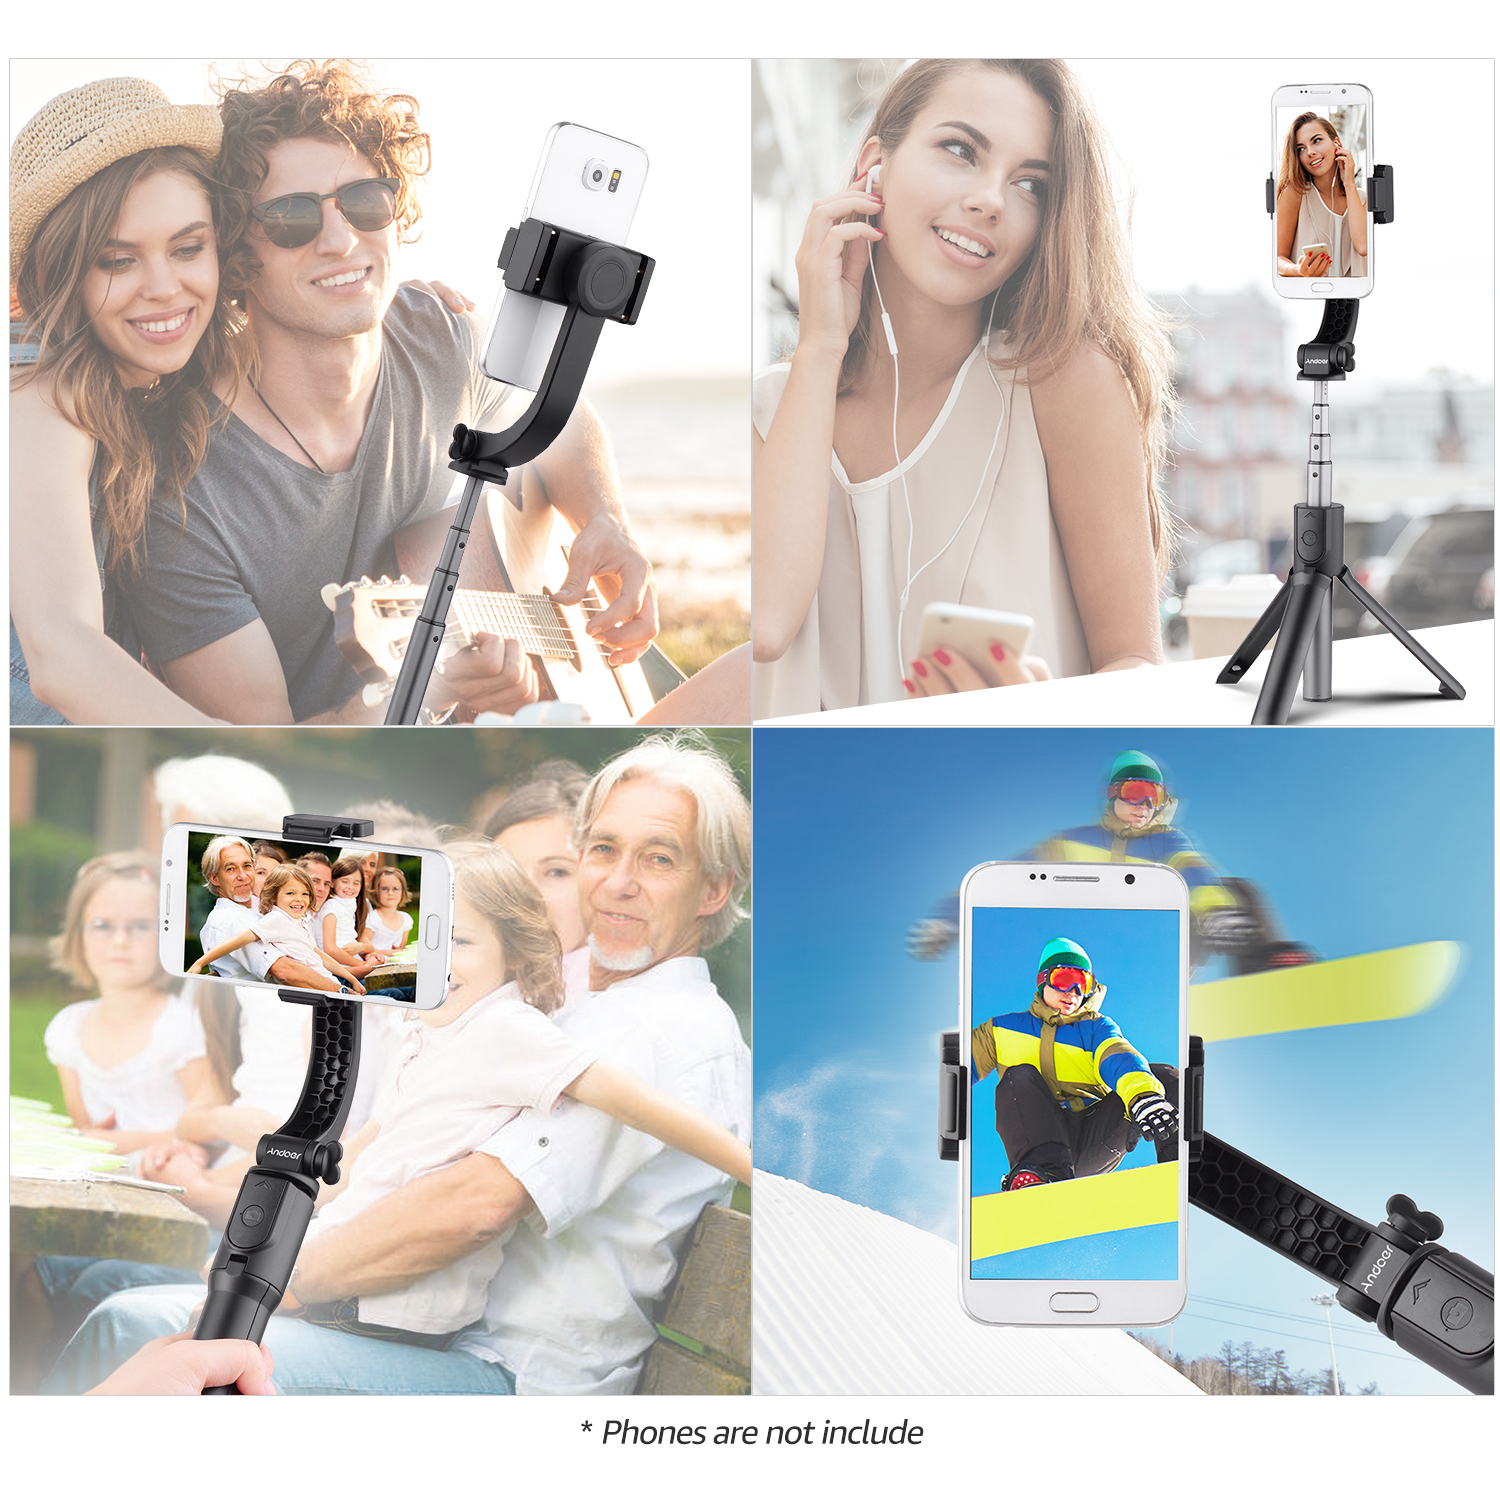 Andoer 3-in-1 Extendable Smartphone Gimbal Stabilizer + Selfie Stick + Tripod Stand for Live Vlogging Video for Smartphones